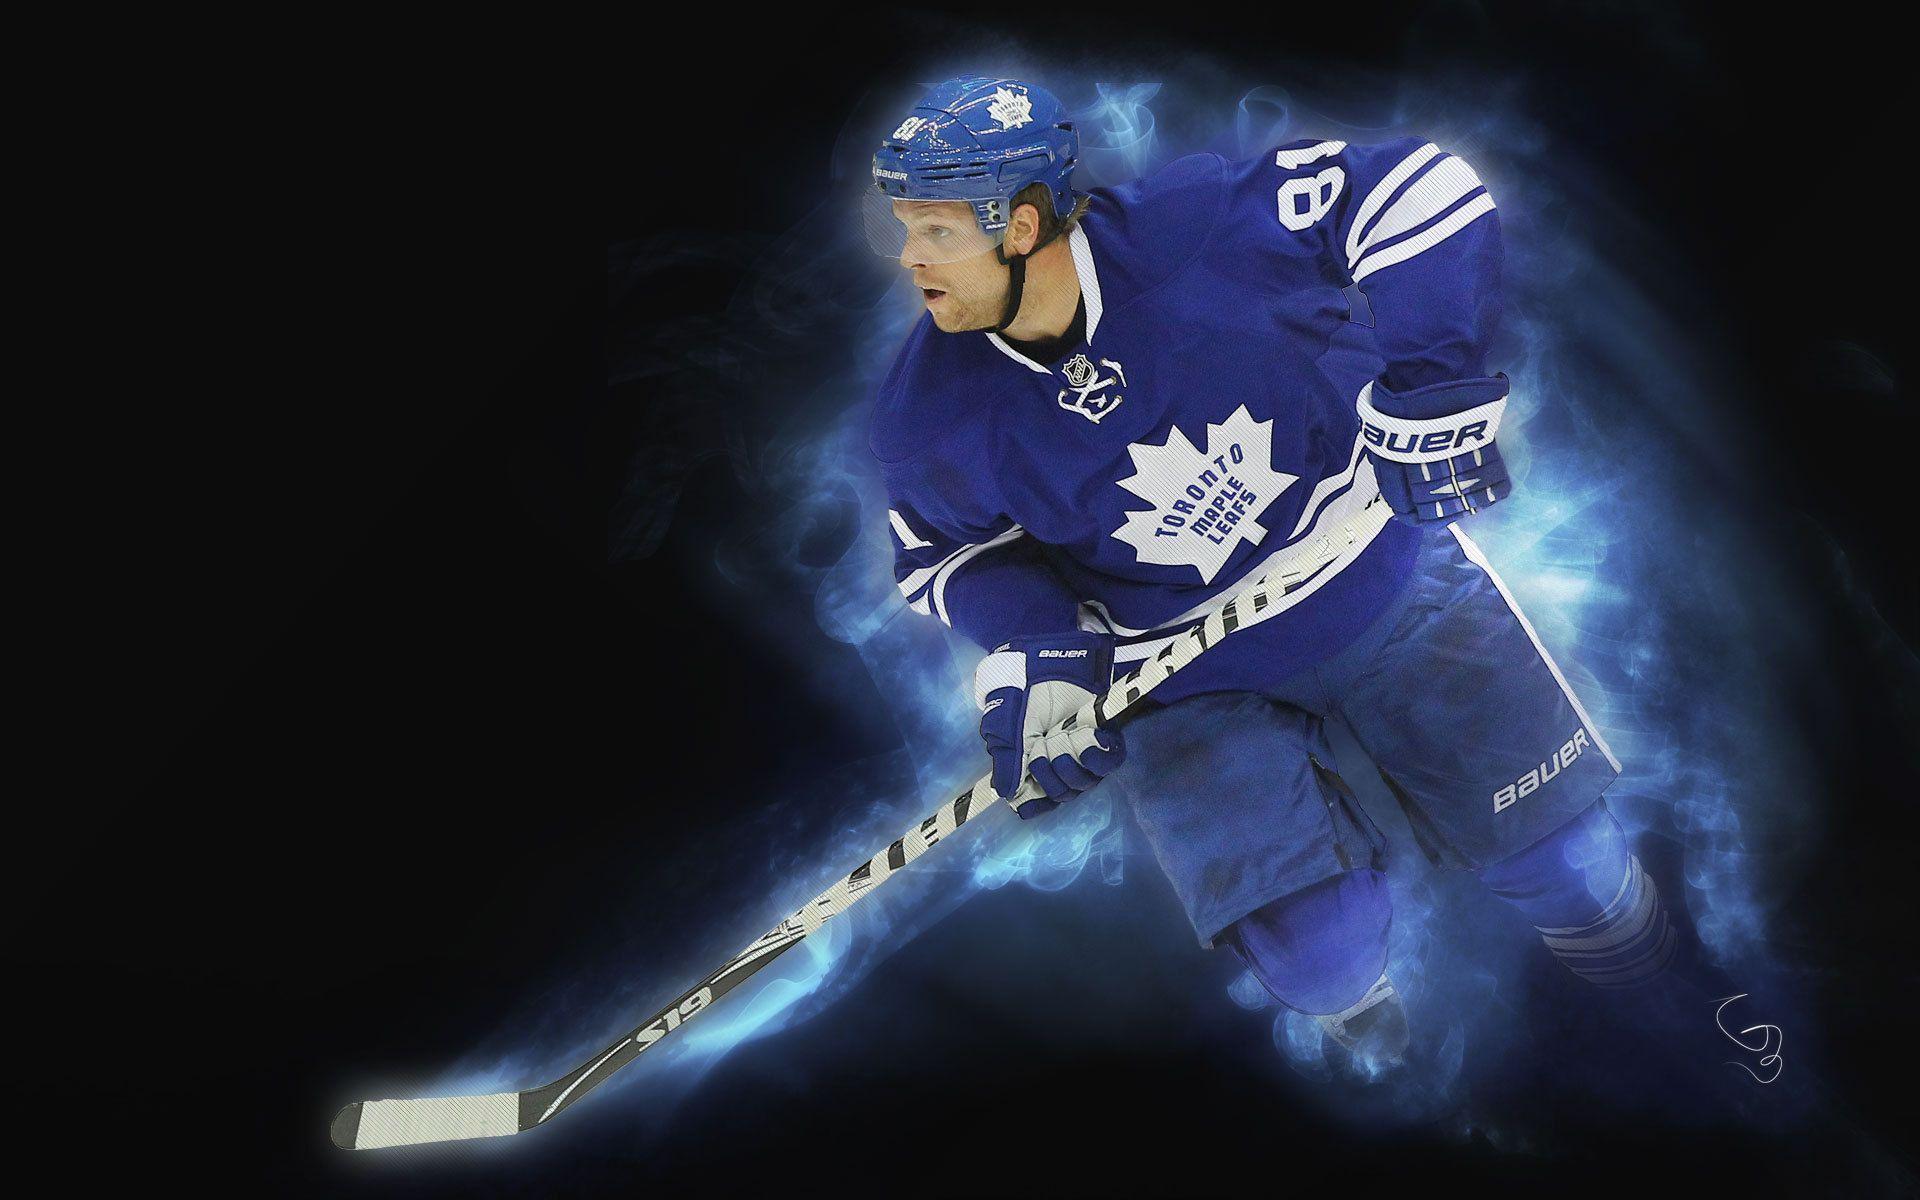 Hockey wallpaper, hockey players picture